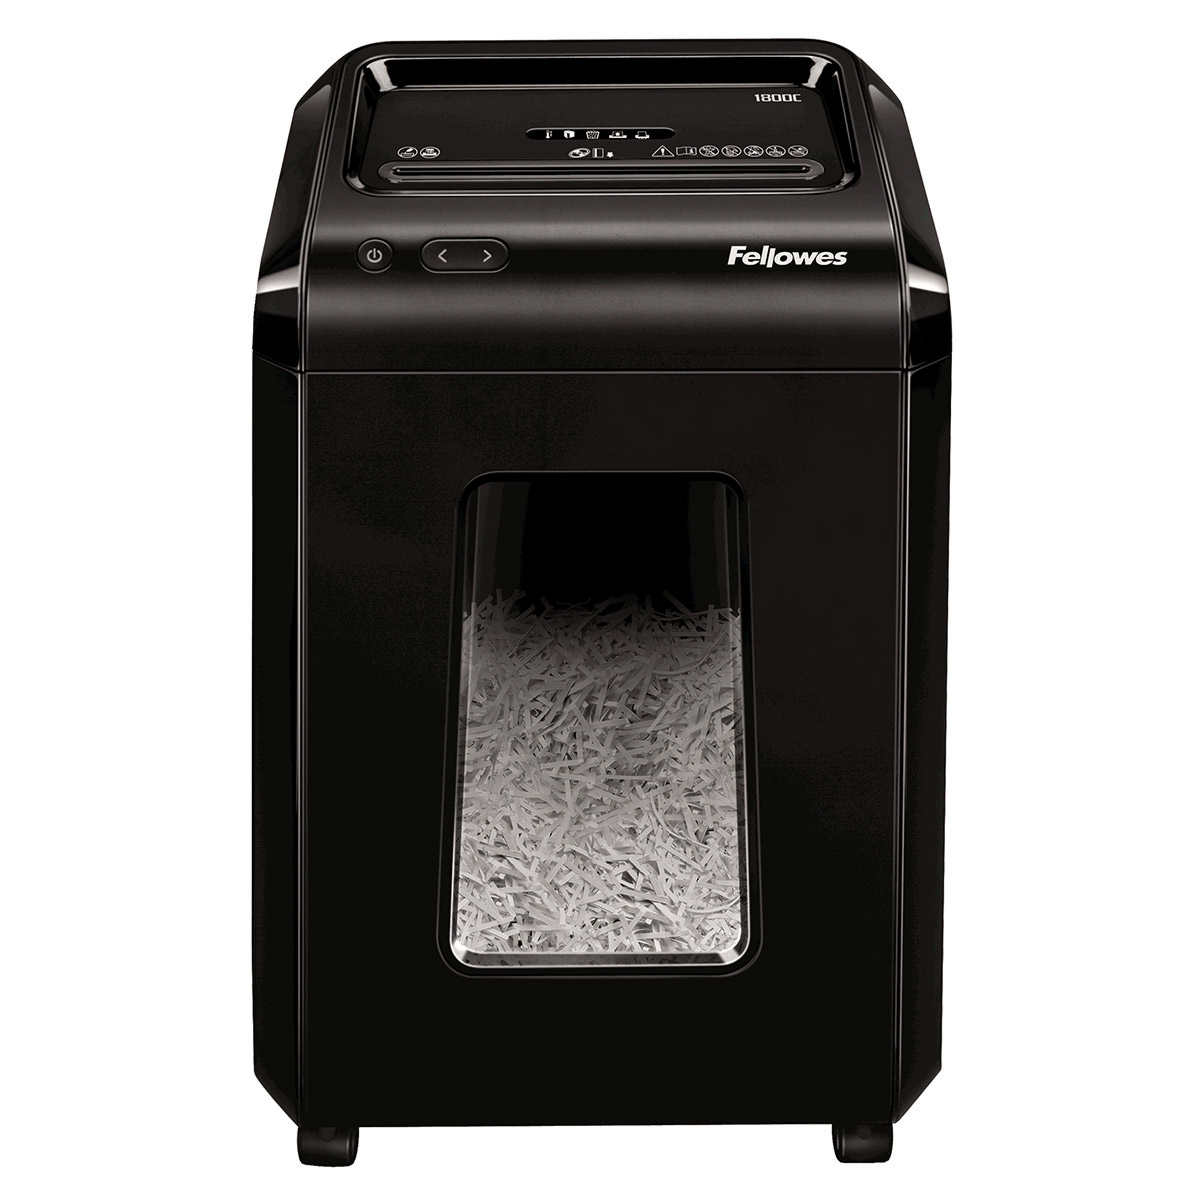 Fellowes Powershred 1800c 18 Sheet Crosscut Shredder,Best Places To Travel In Us In October 2020